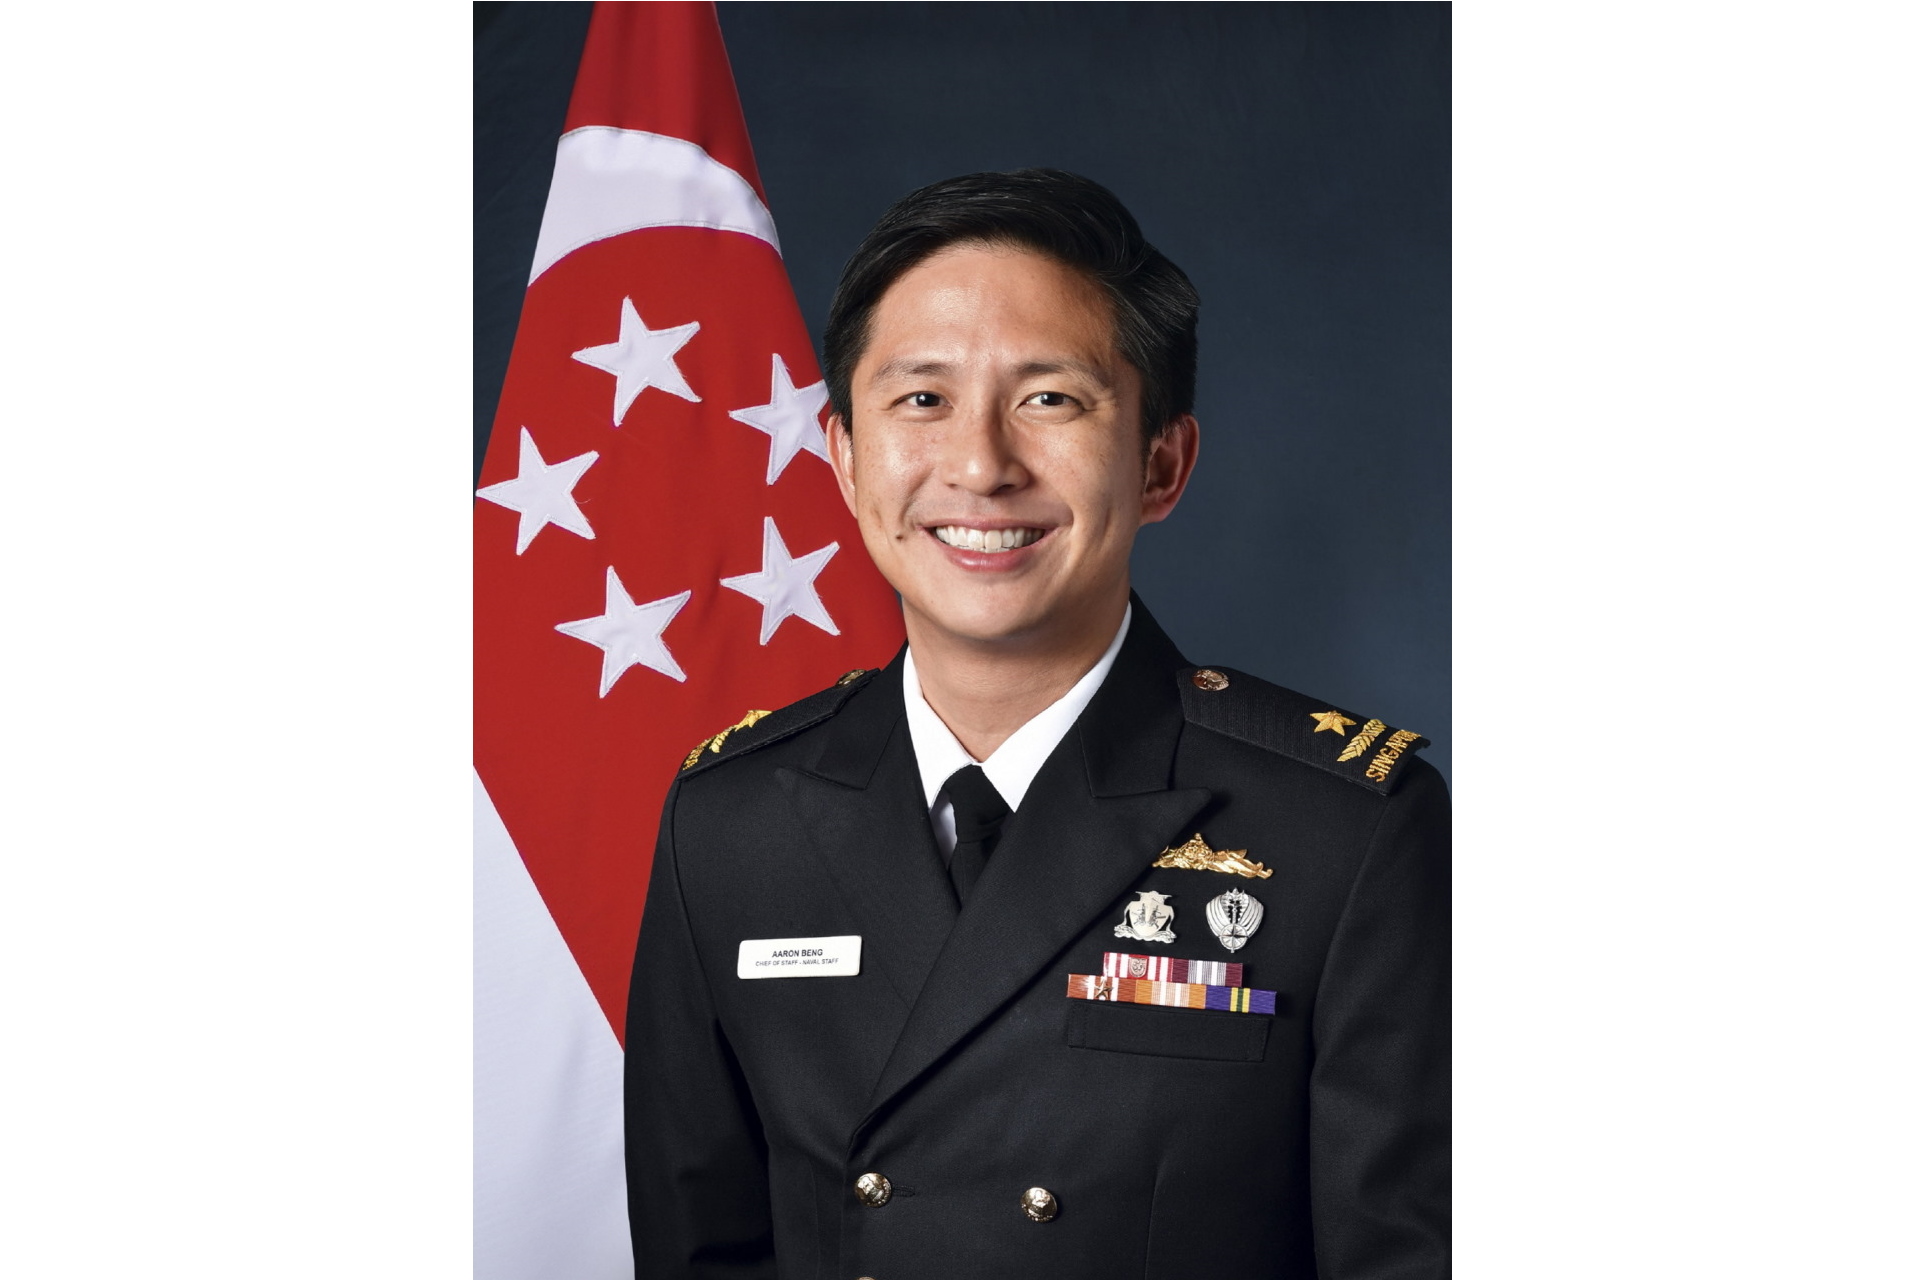 RADM Aaron Beng Yao Cheng, currently Chief of Staff - Naval Staff (COS-NS), will take over as the Chief of Navy on 23 March 2020.